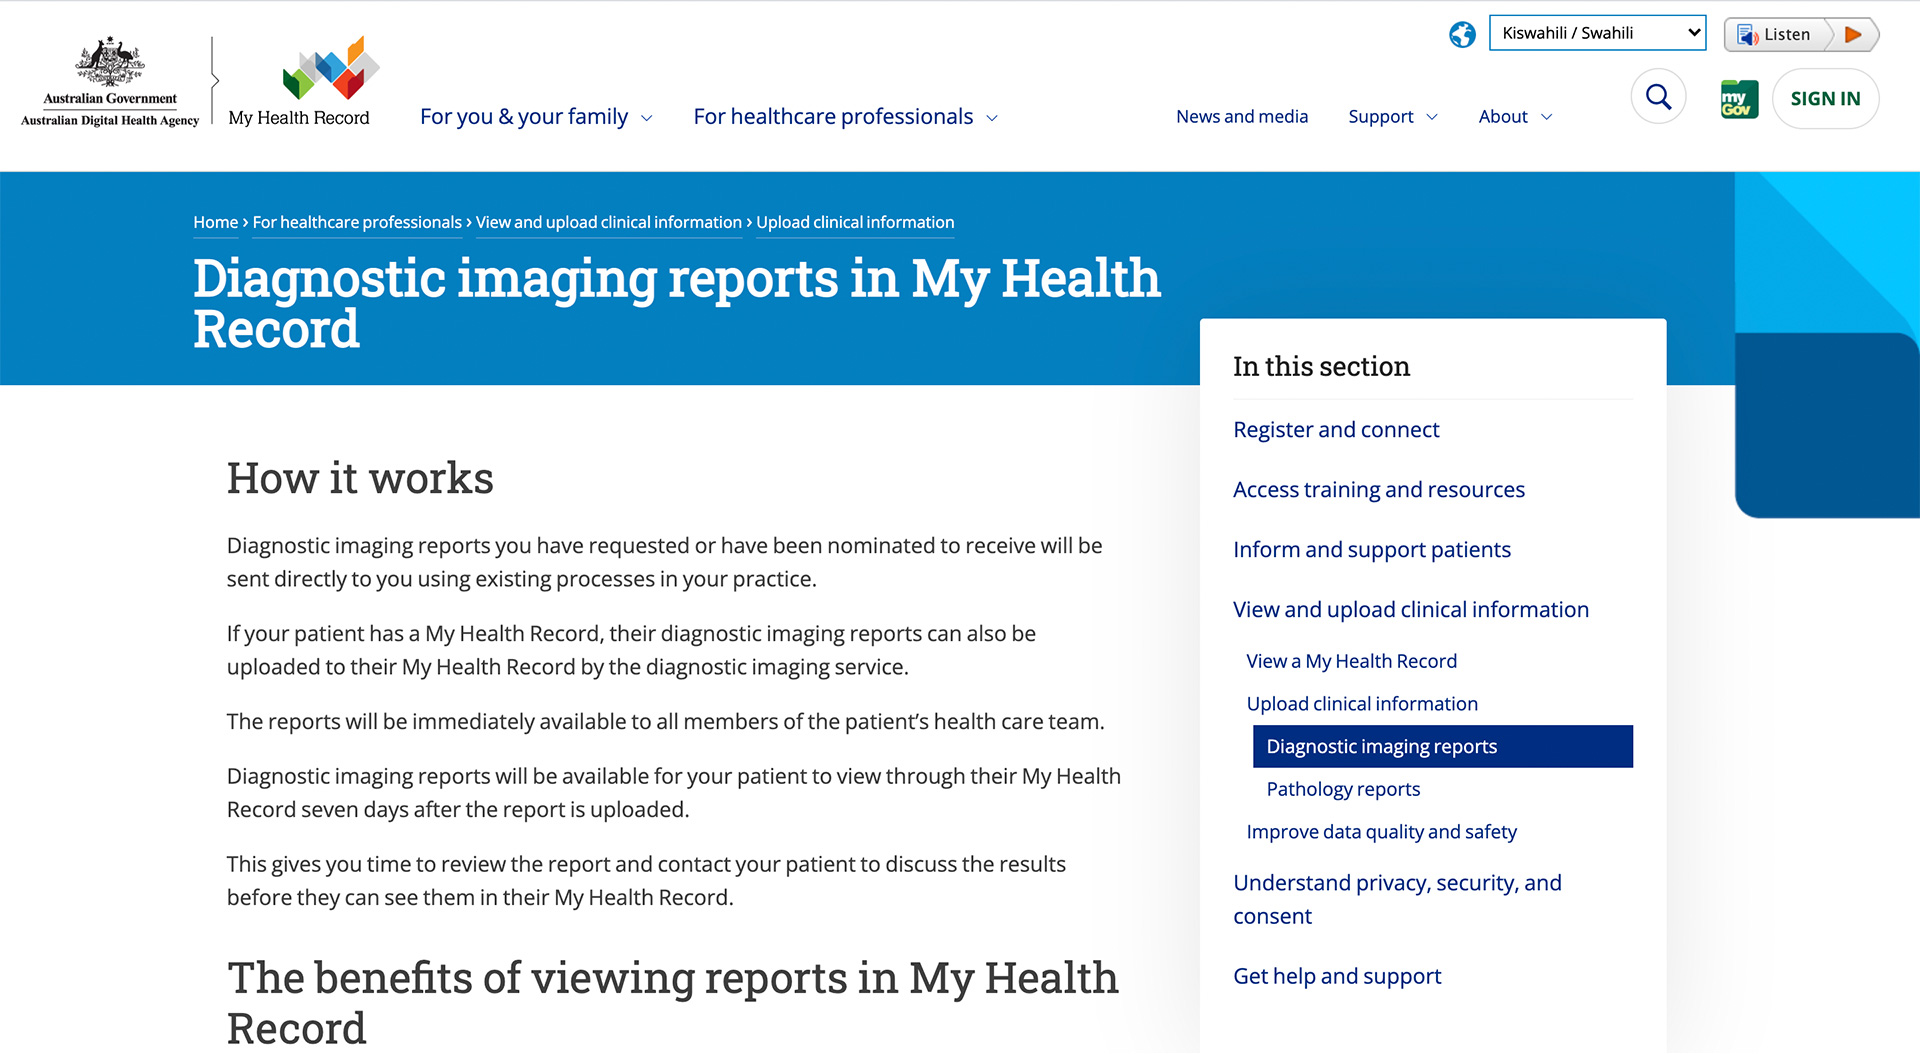 Diagnostic imaging reports overview